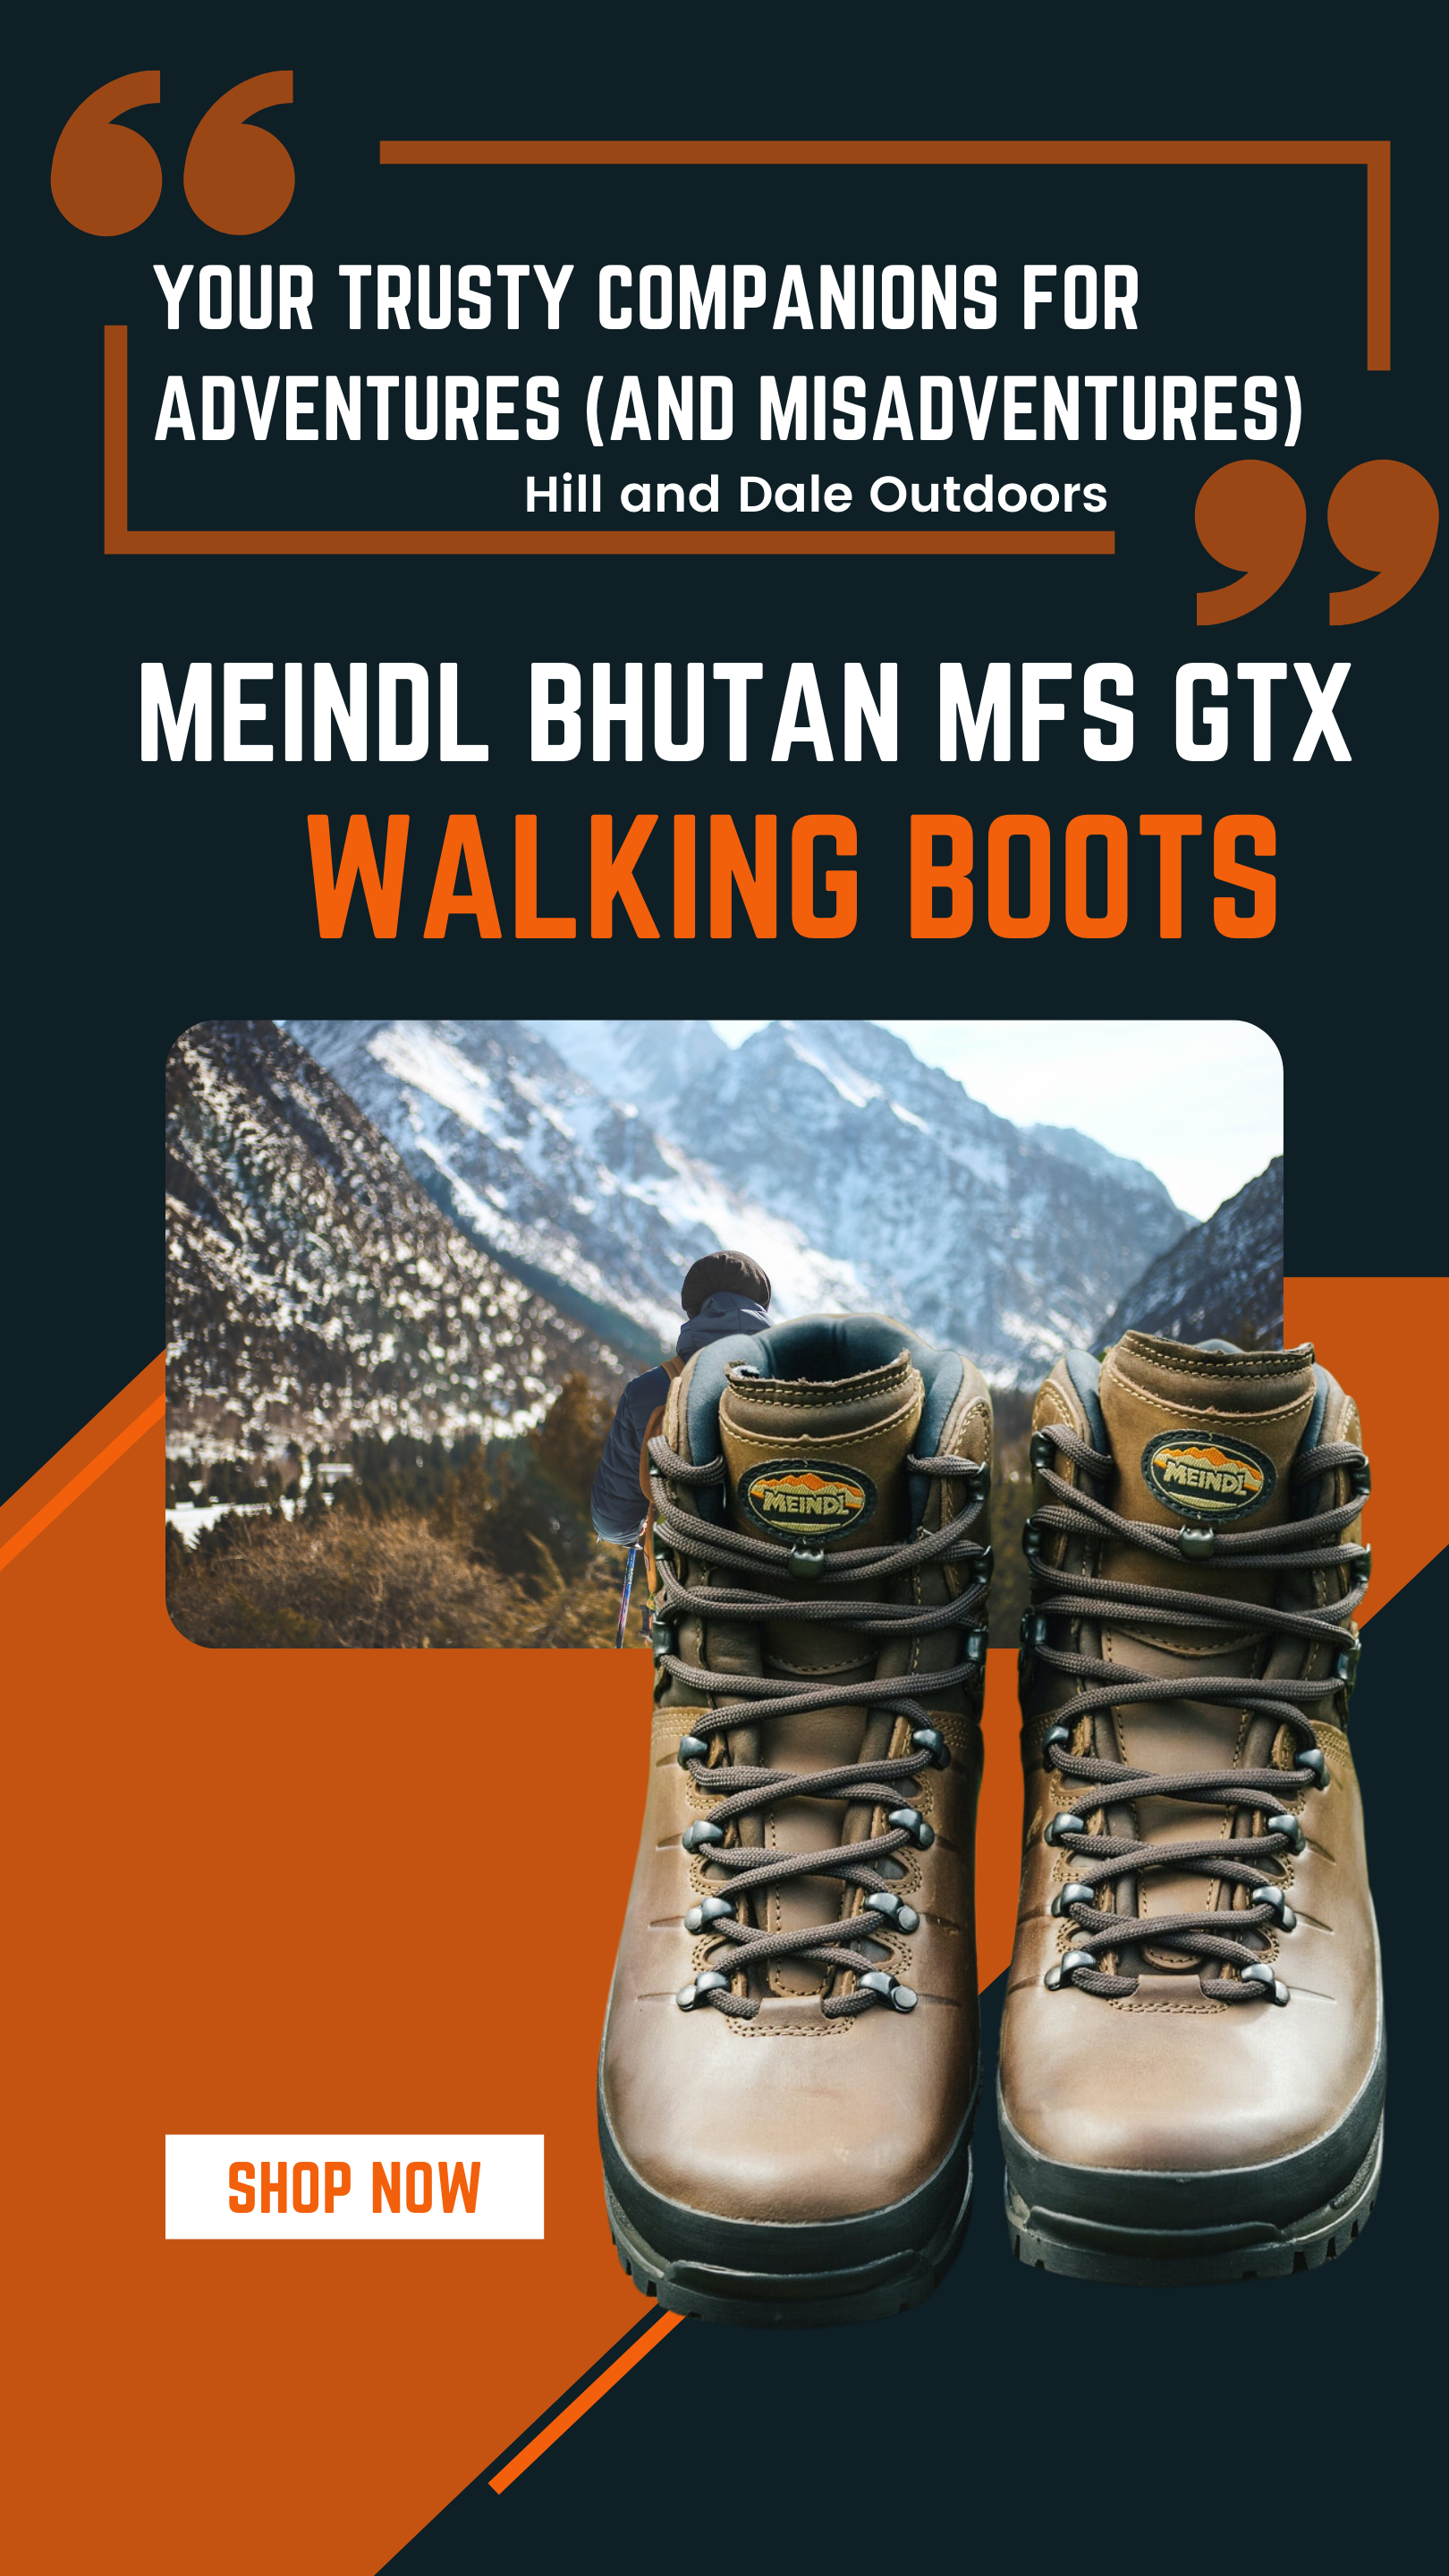 Meindl Bhutan MFS GTX Walking Boots: Your Trusty Companions for Adventures (and Misadventures)